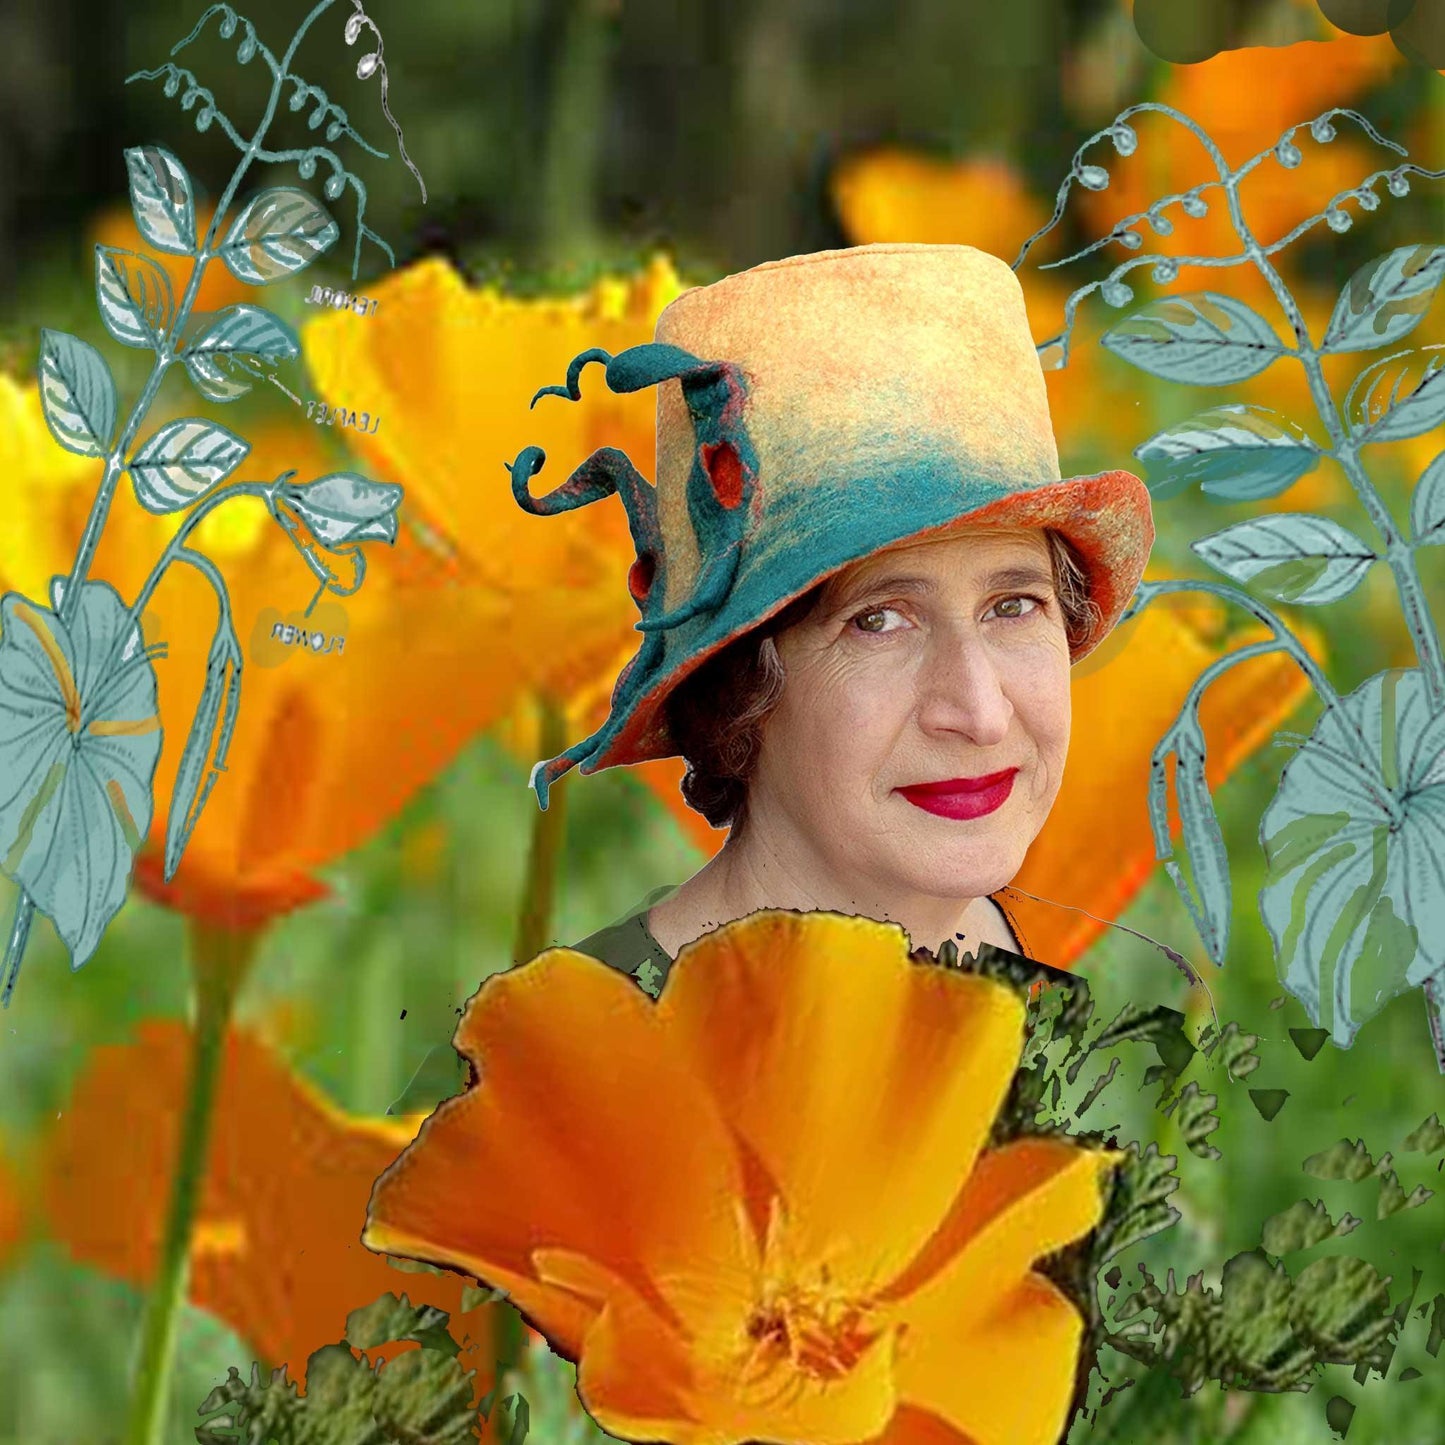 Felted Peapod Fedora Hat set amongst California Poppies and Stylized Botanical drawings of peapods.